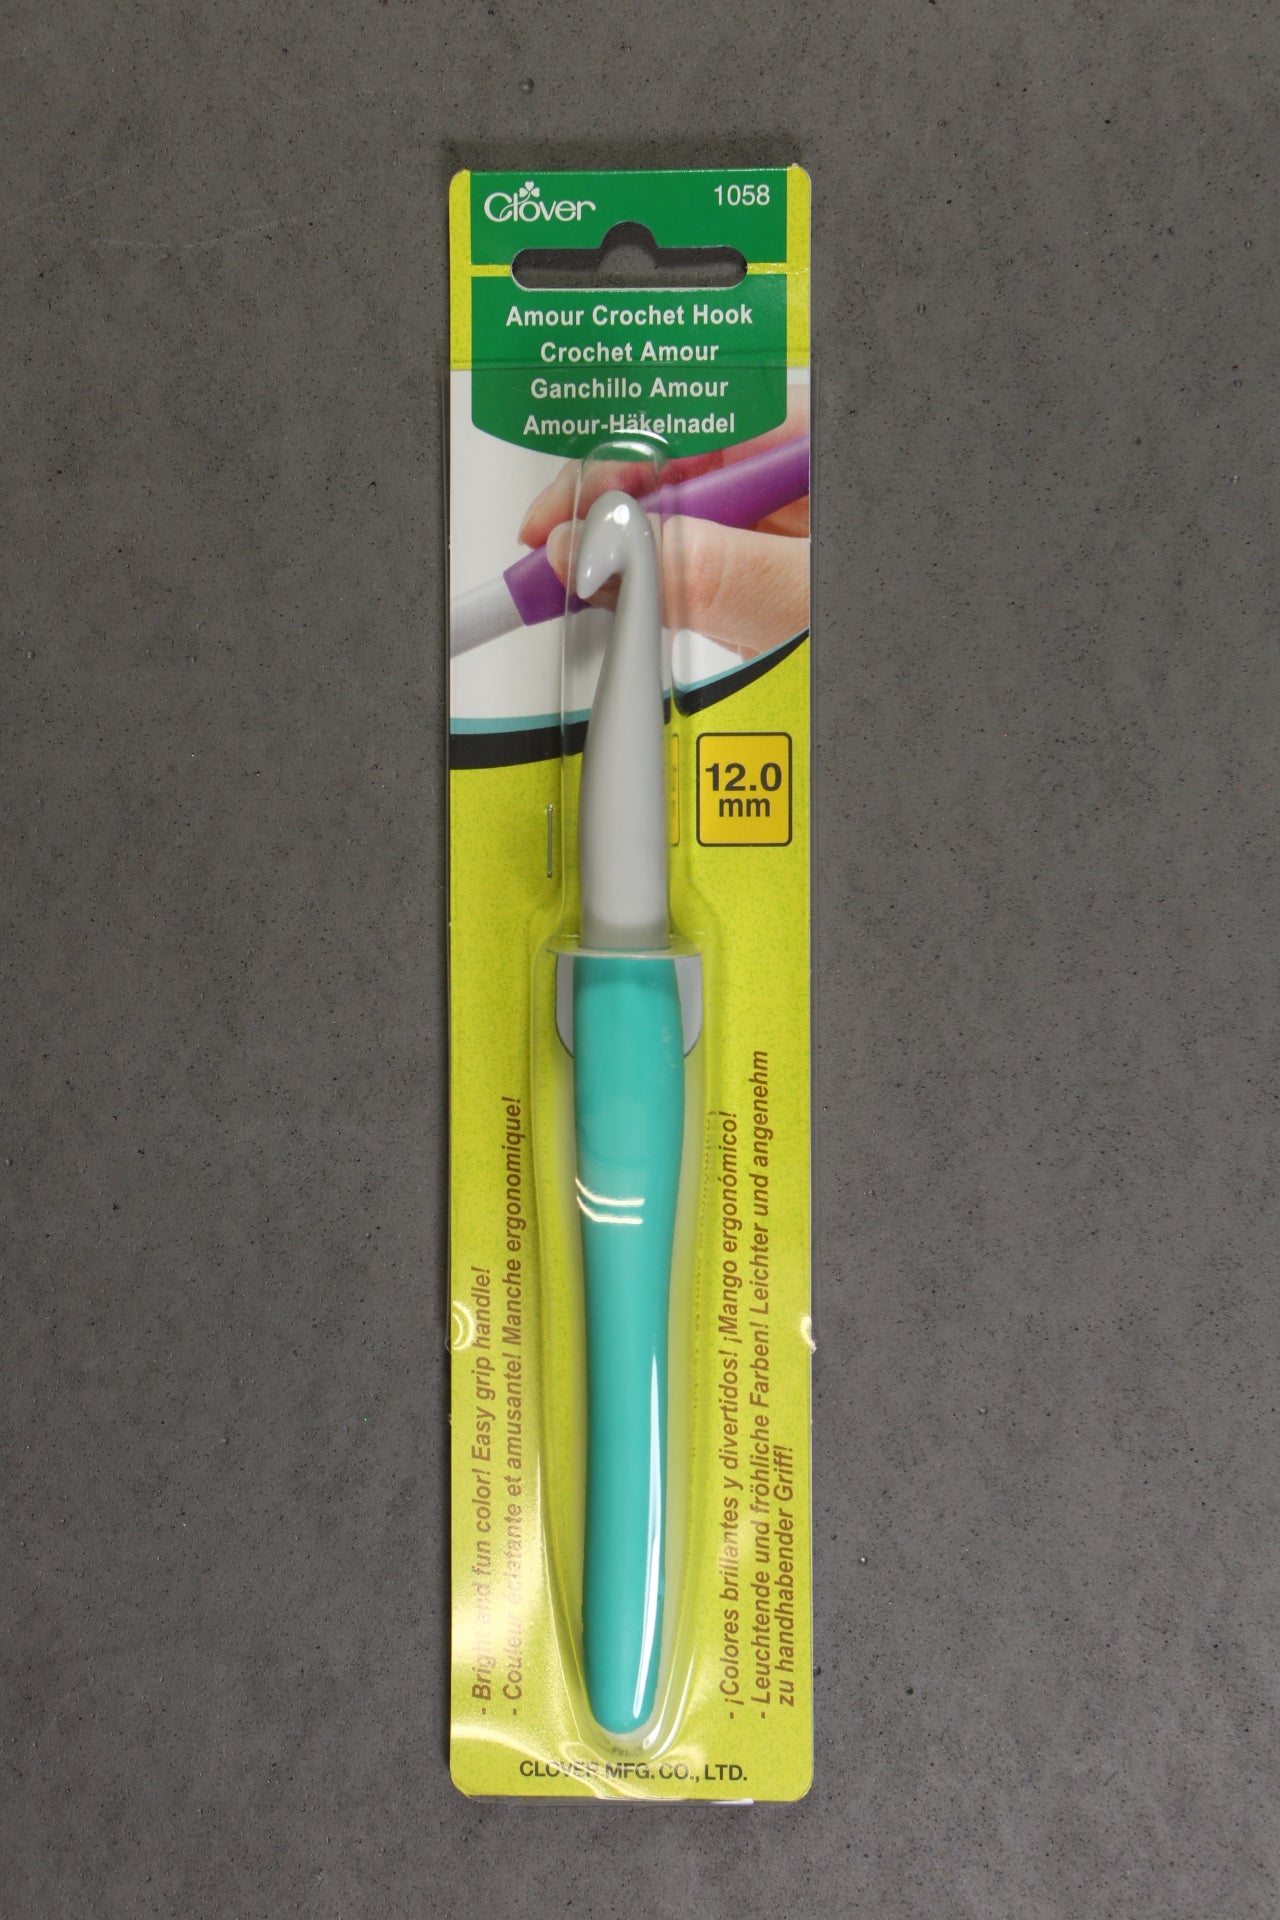 Amour Crochet Hook Size 12mm 1058 NEW